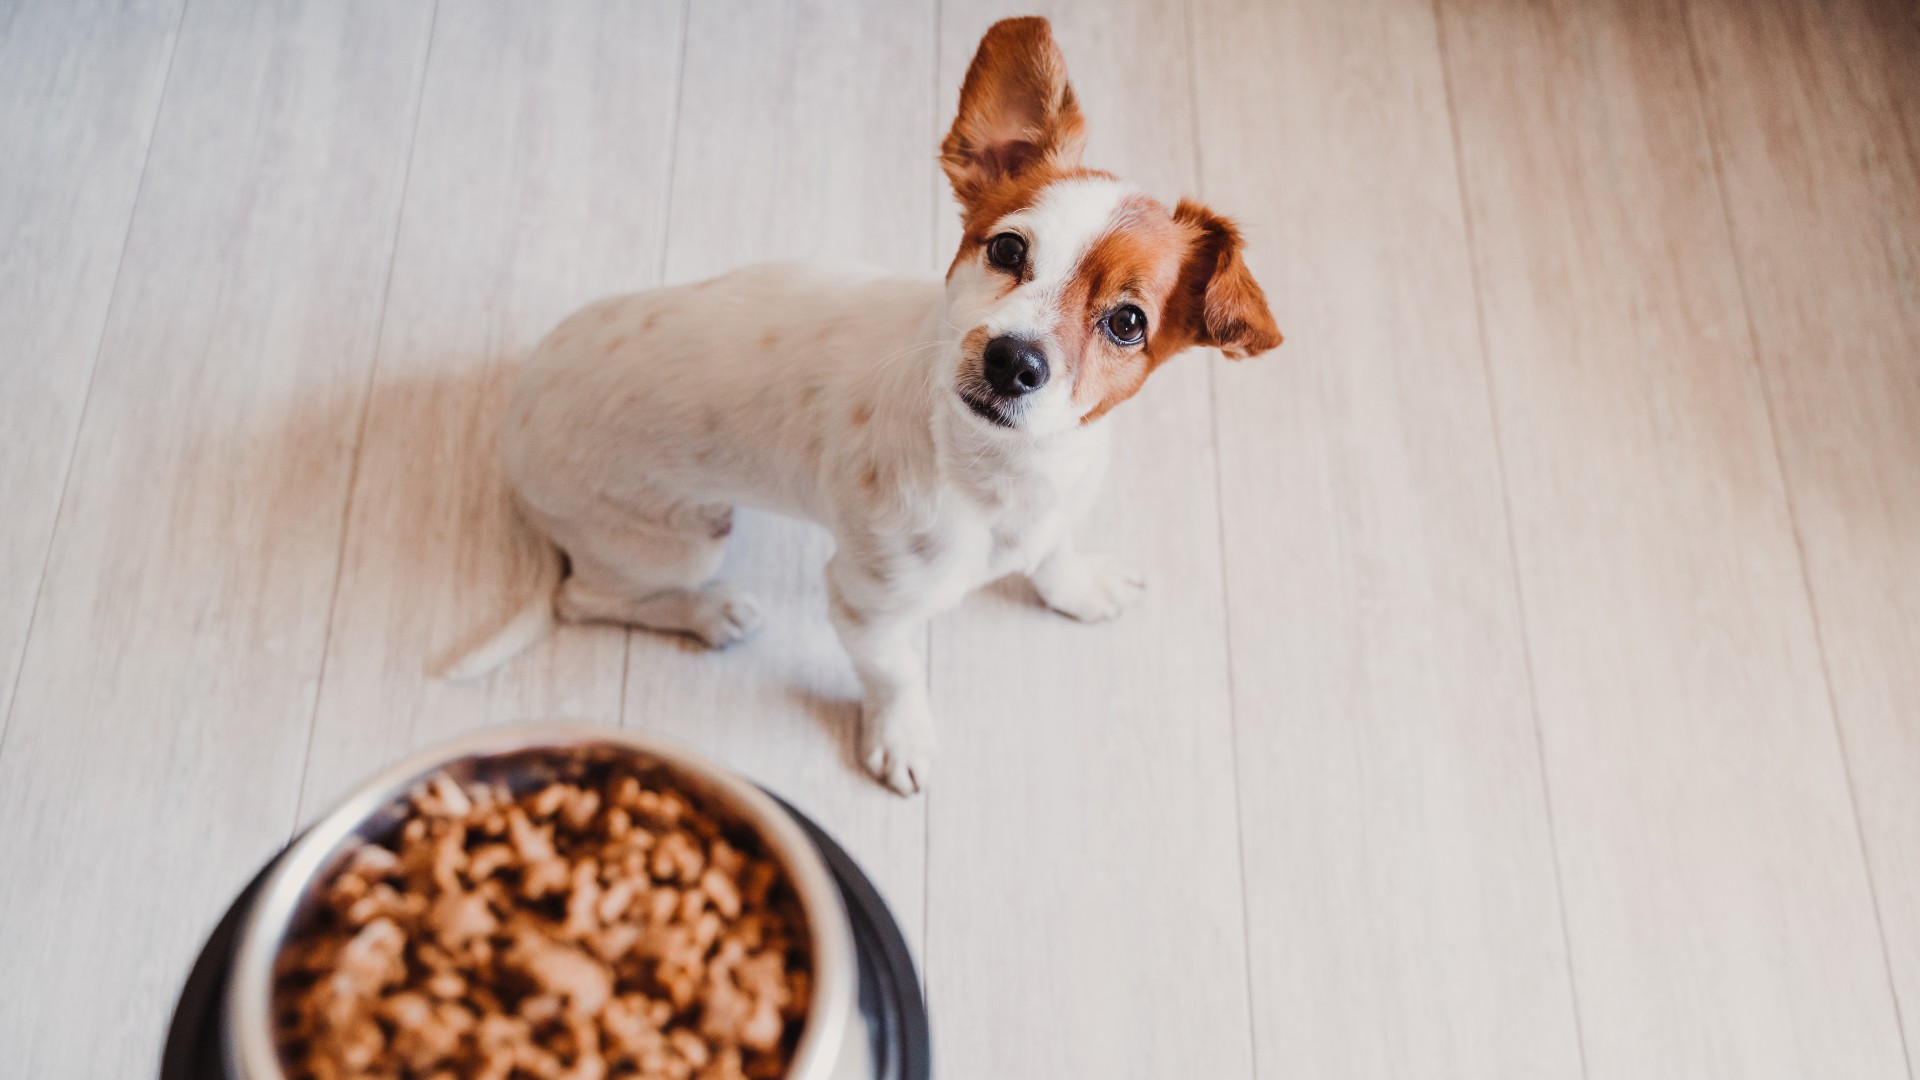 Will eating pet food kill you? | Live Science